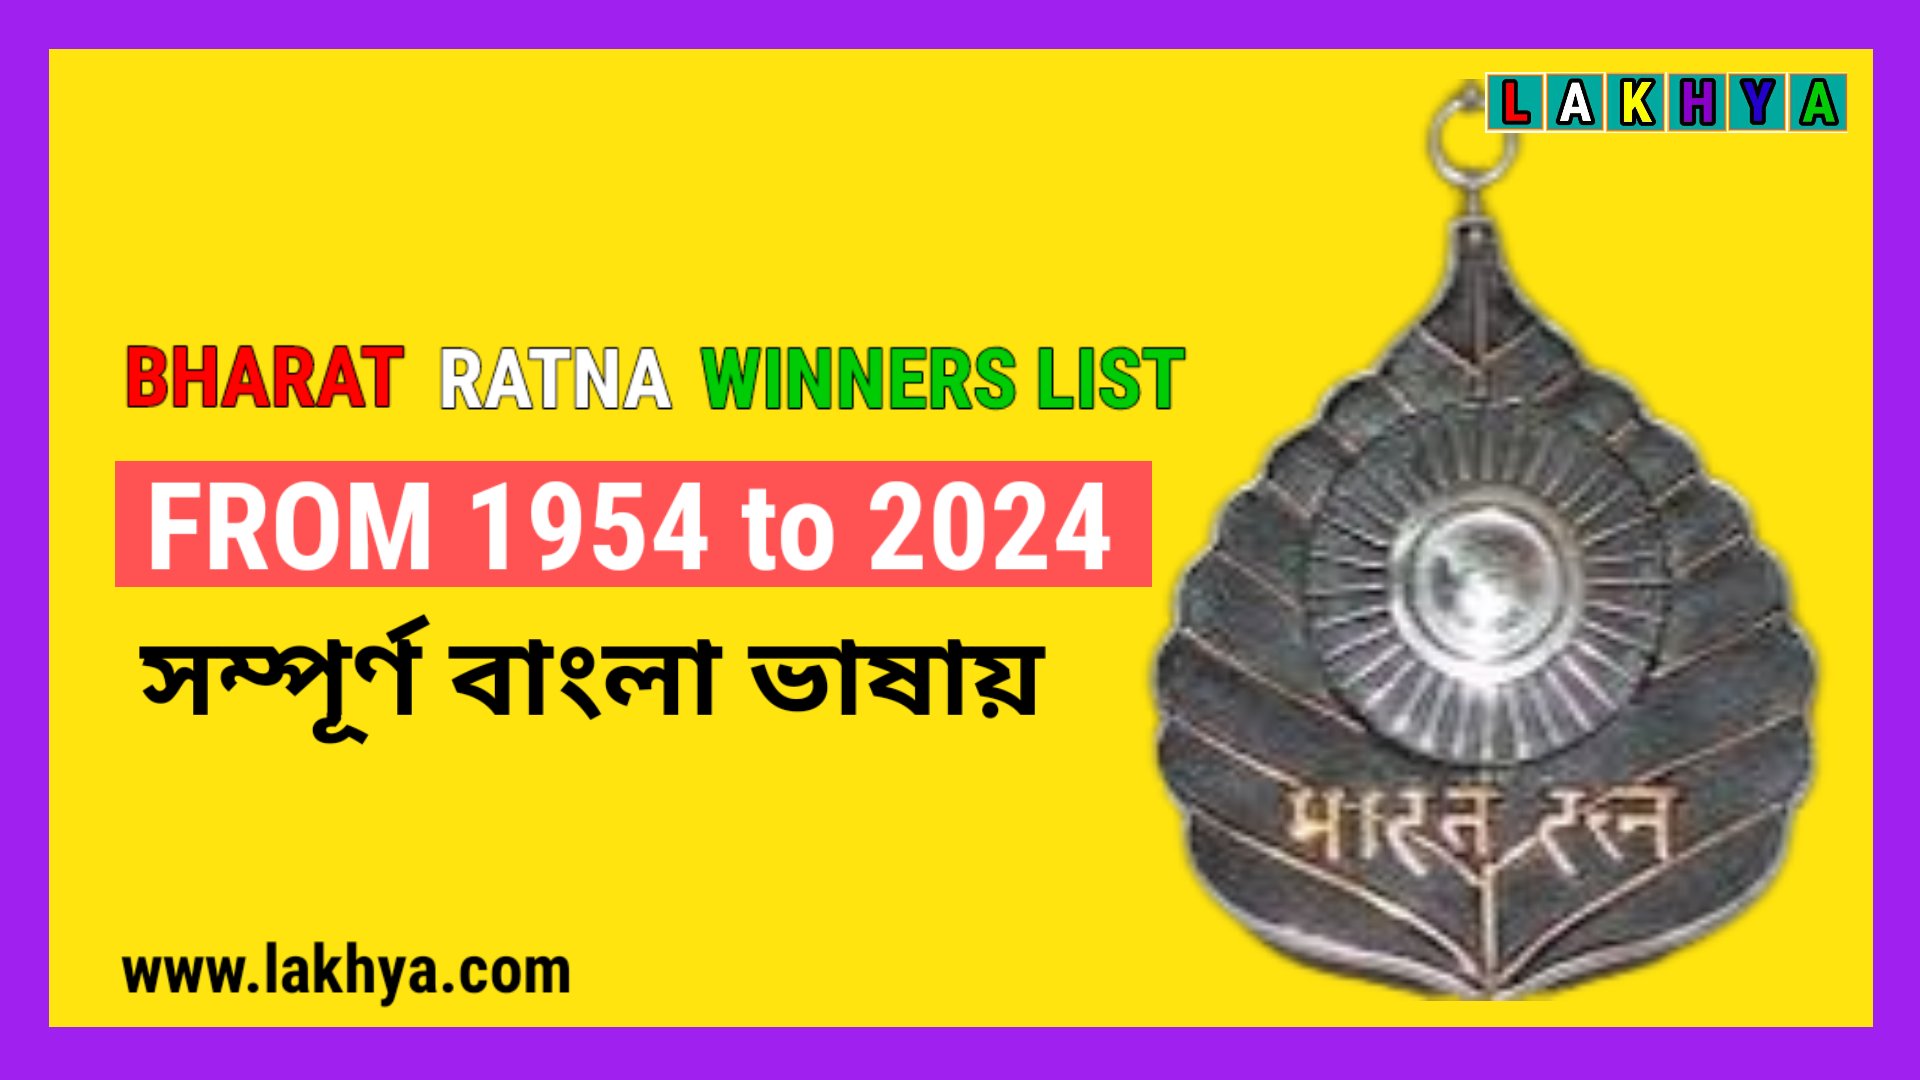 Bharat Ratna Winners list from 1954 to 2024 in Bengali